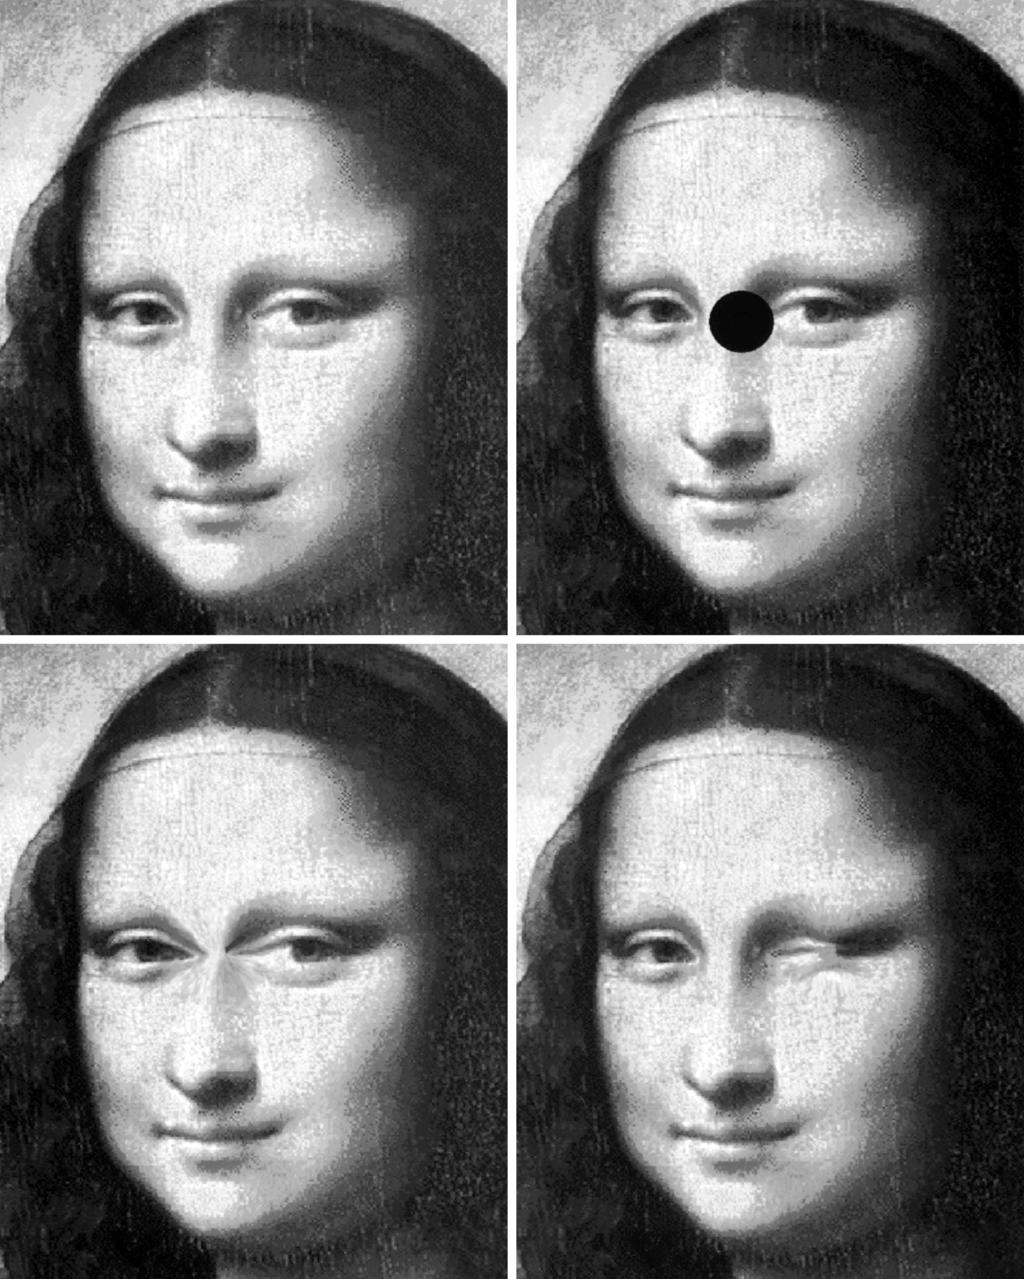 A C D Figure 2. Photographs of a Mona Lisa portrait modified by computer software. A, Normal portrait., Scotoma in a part of the face.